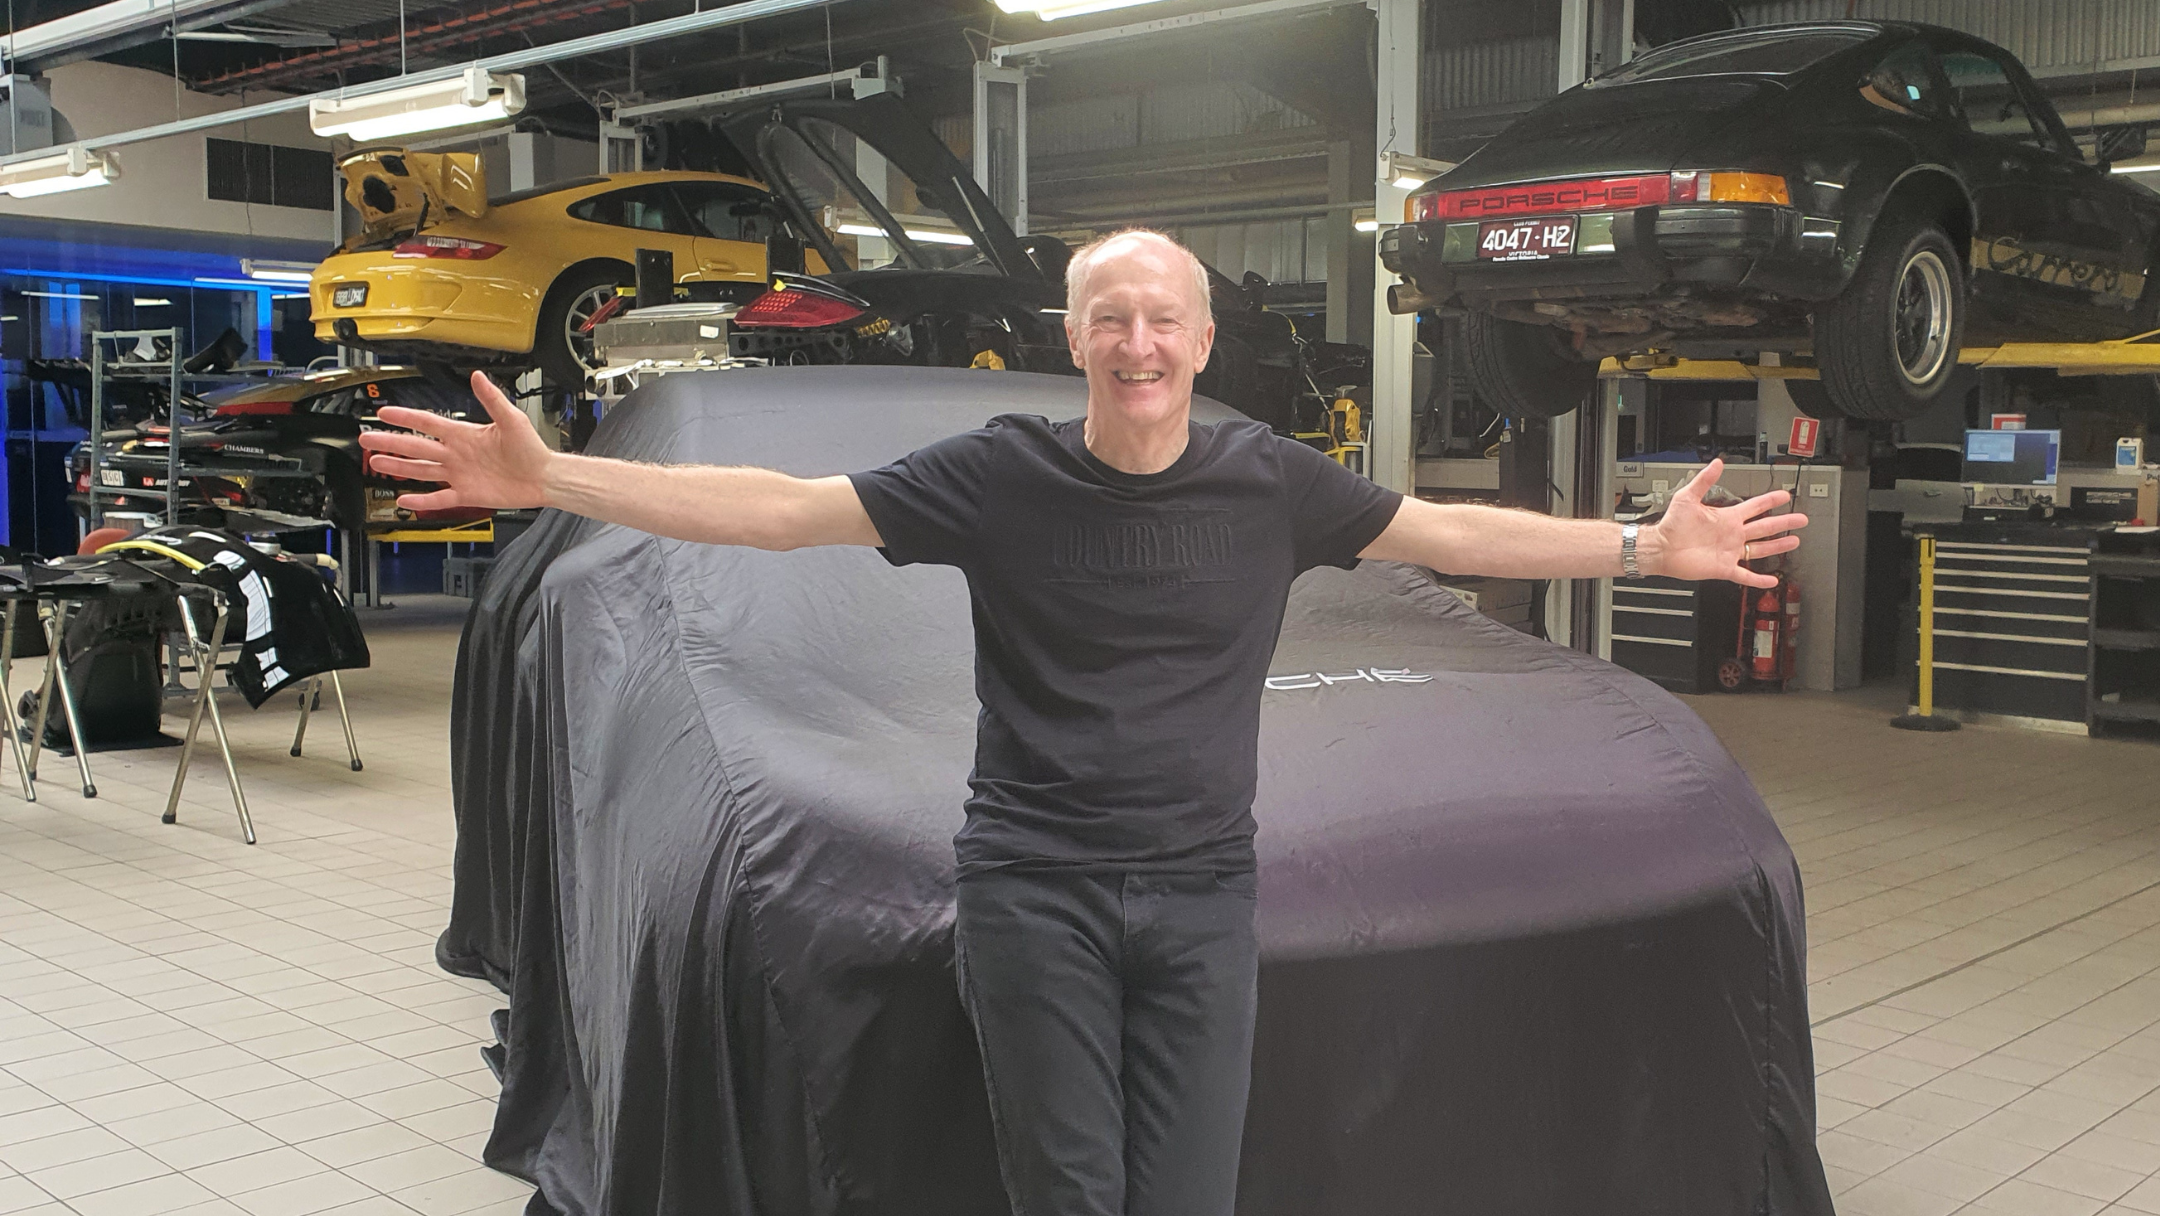 The day Rod bought his dream car, a Porsche Macan S. (Source: supplied)